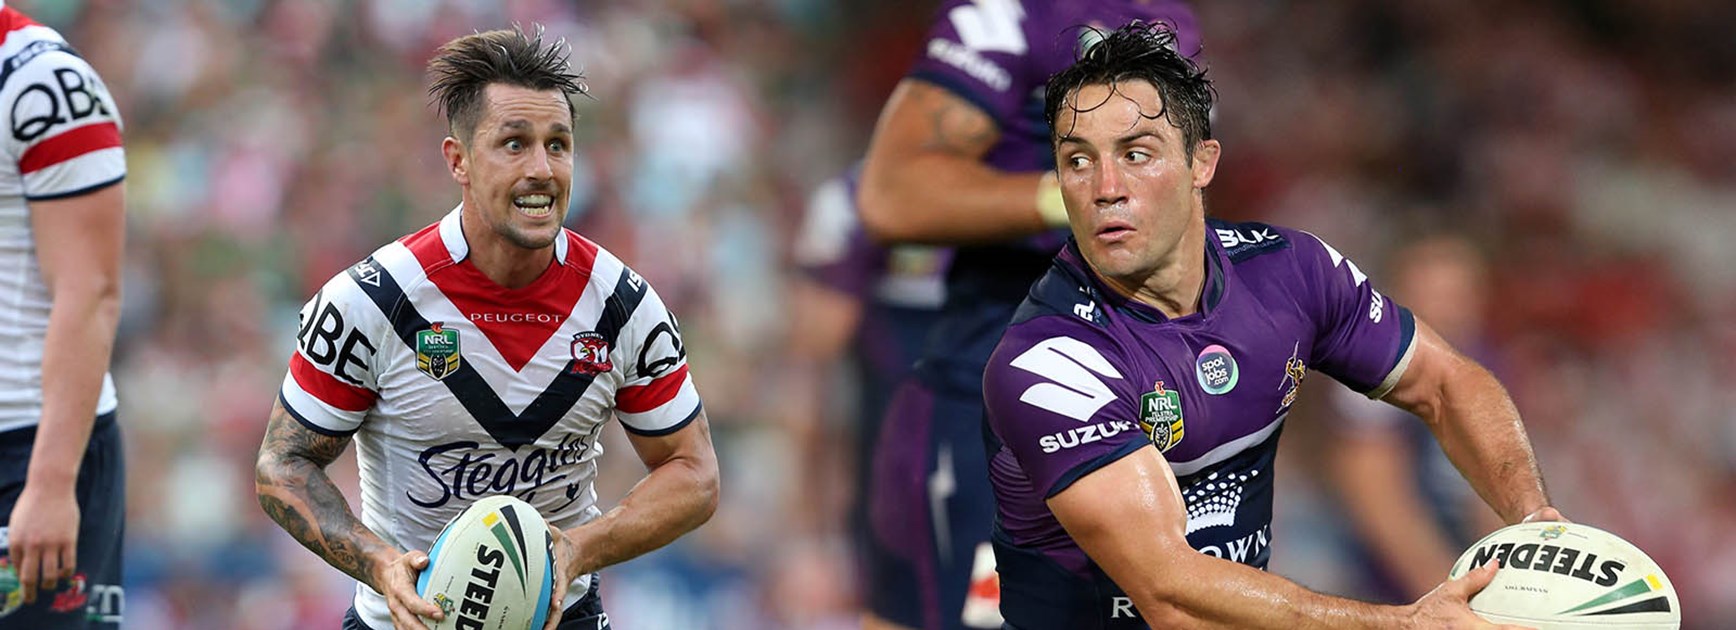 Twice a Mitch Pearce led side has been defeated by a Cooper Cronk field goal. Will it happen a third time on Monday night?